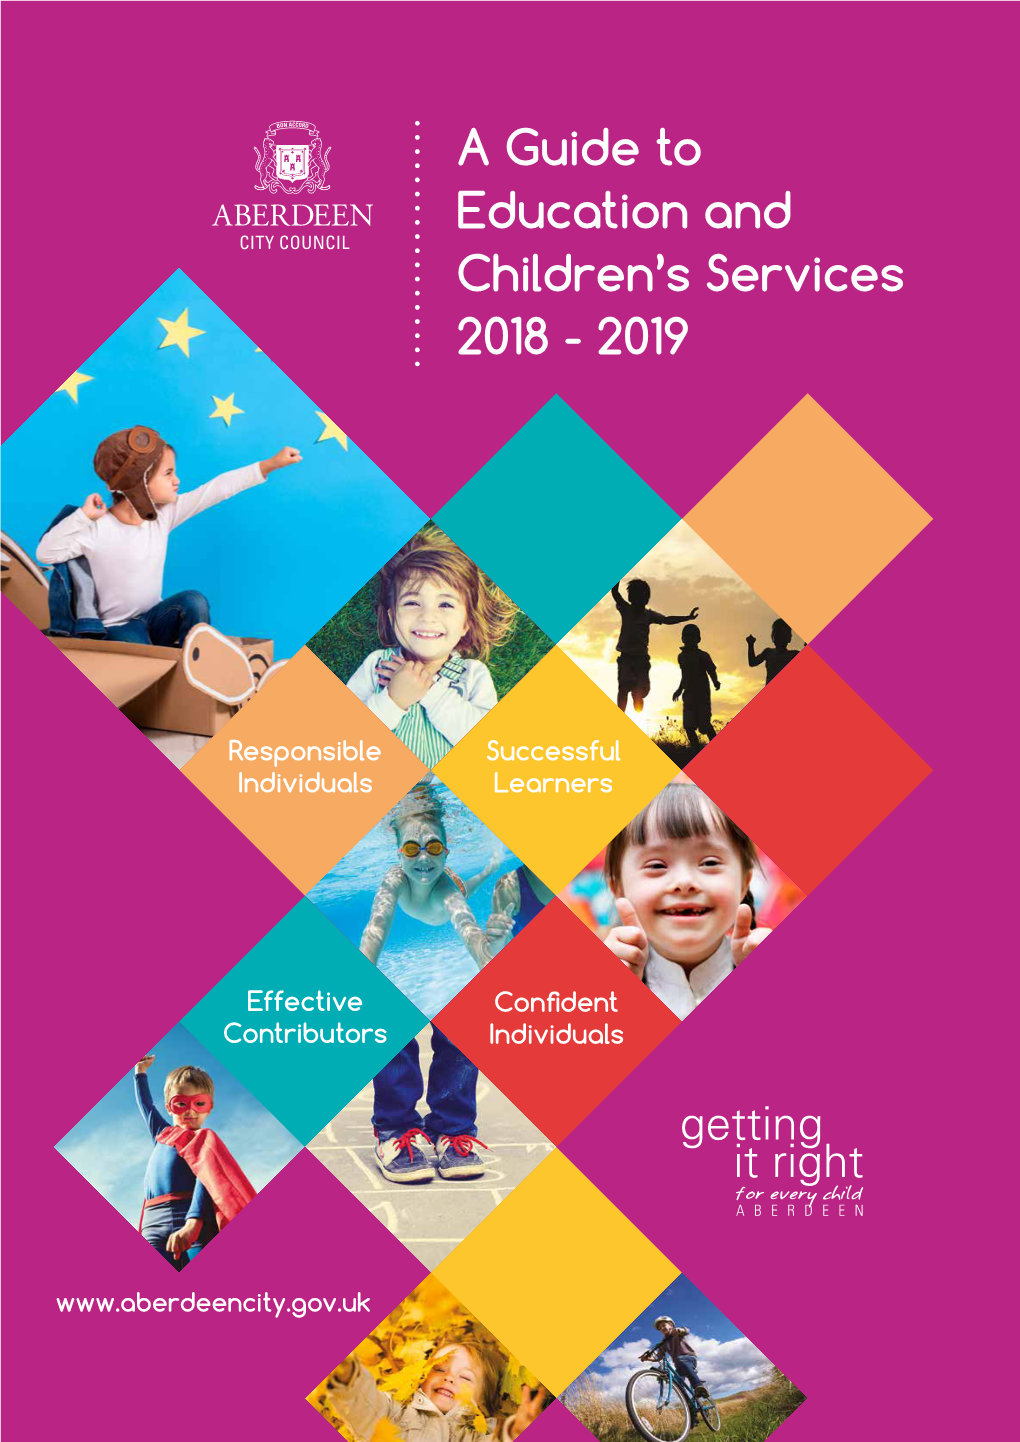 A Guide to Education and Children's Services 2018